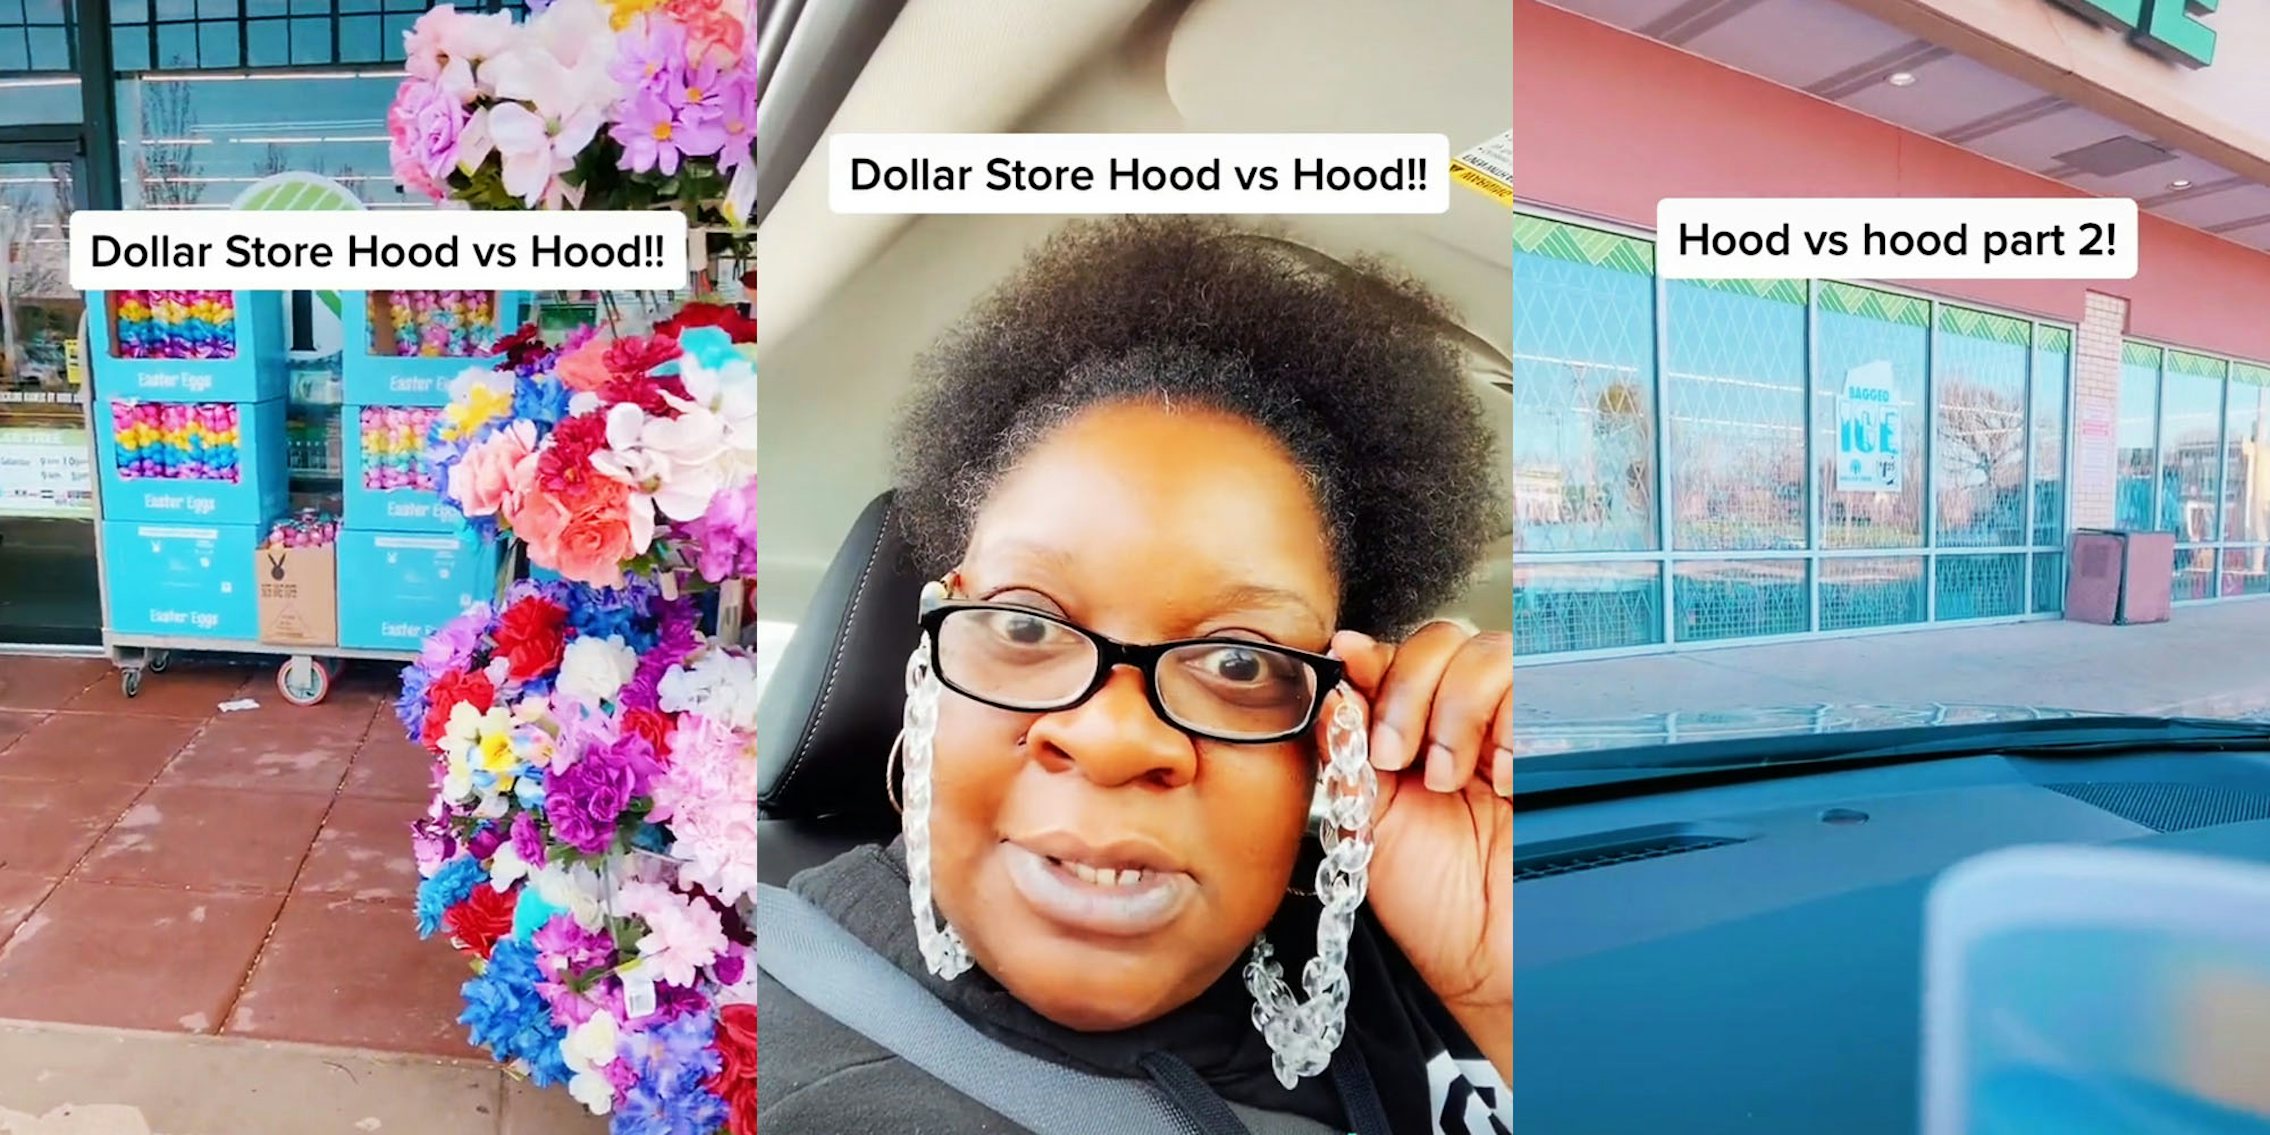 Outside of dollar tree with items outside caption 'Dollar Store Hood VS Hood' (l) Woman speaking in car mad caption 'Dollar Store Hood VS Hood' (c) Dollar Tree with nothing outside caption 'Hood VS Hood Part 2' (r)